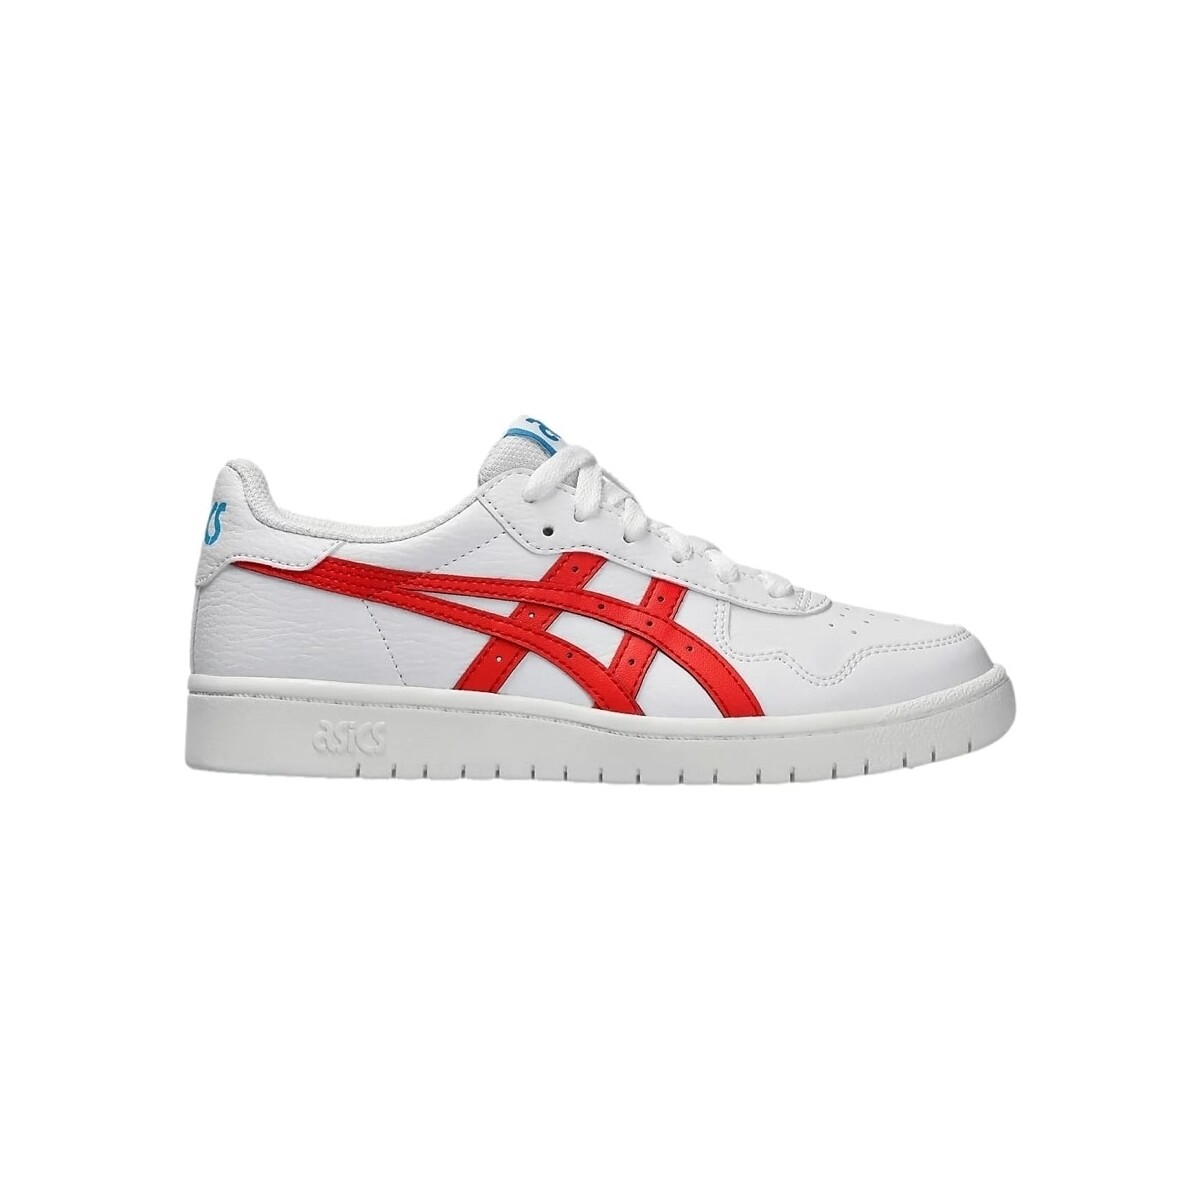 Sneakers Asics Japan S GS – White/True Red